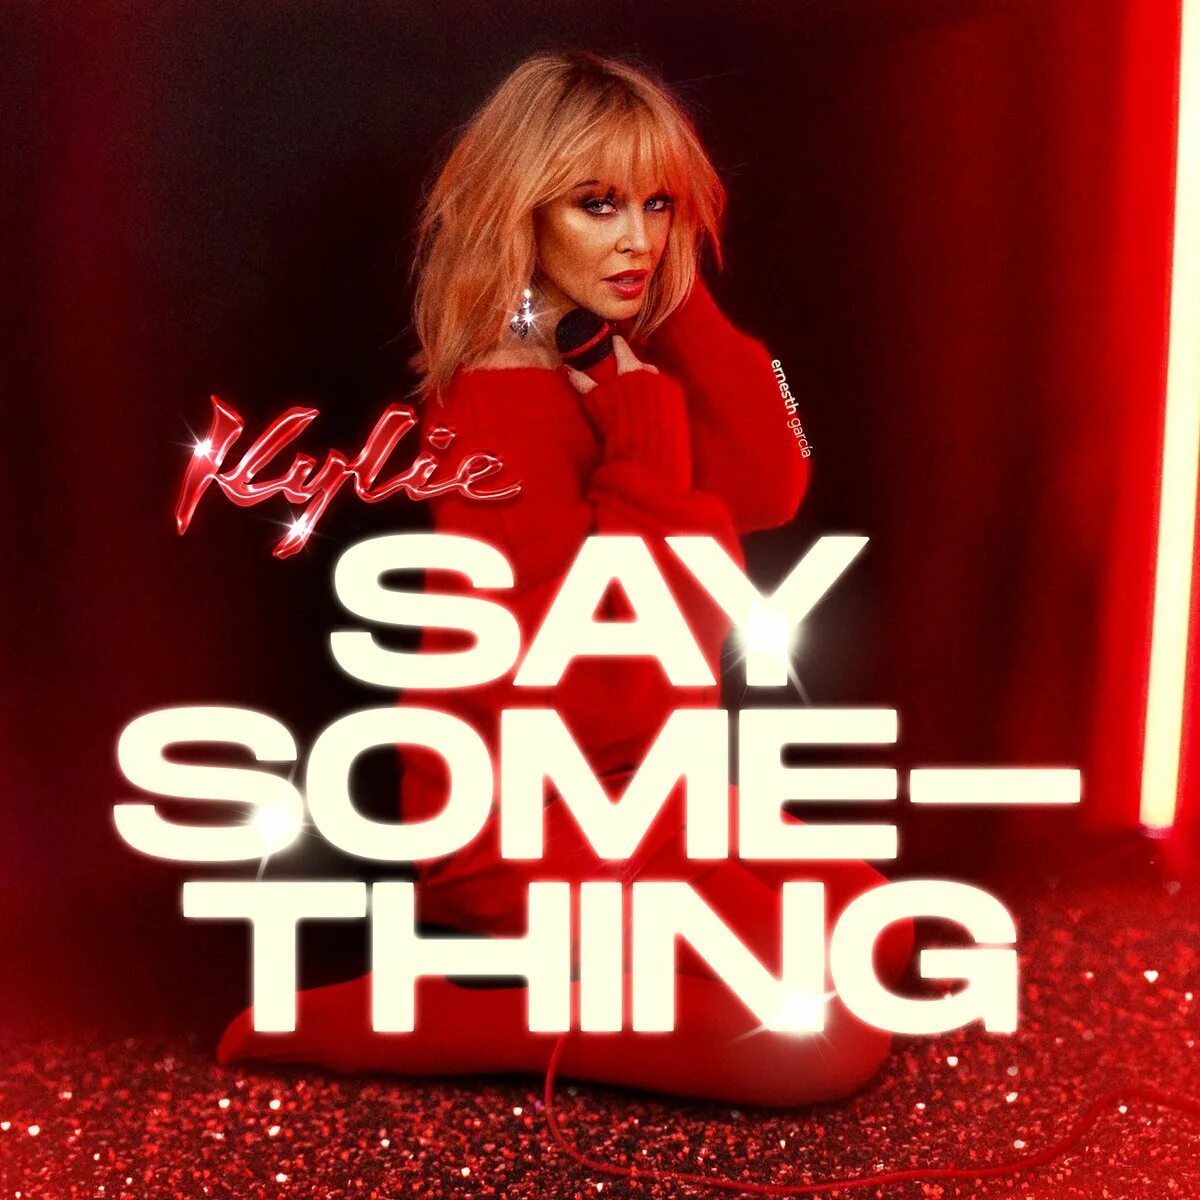 Say something Kylie Minogue. Kylie Minogue something. Can i say something